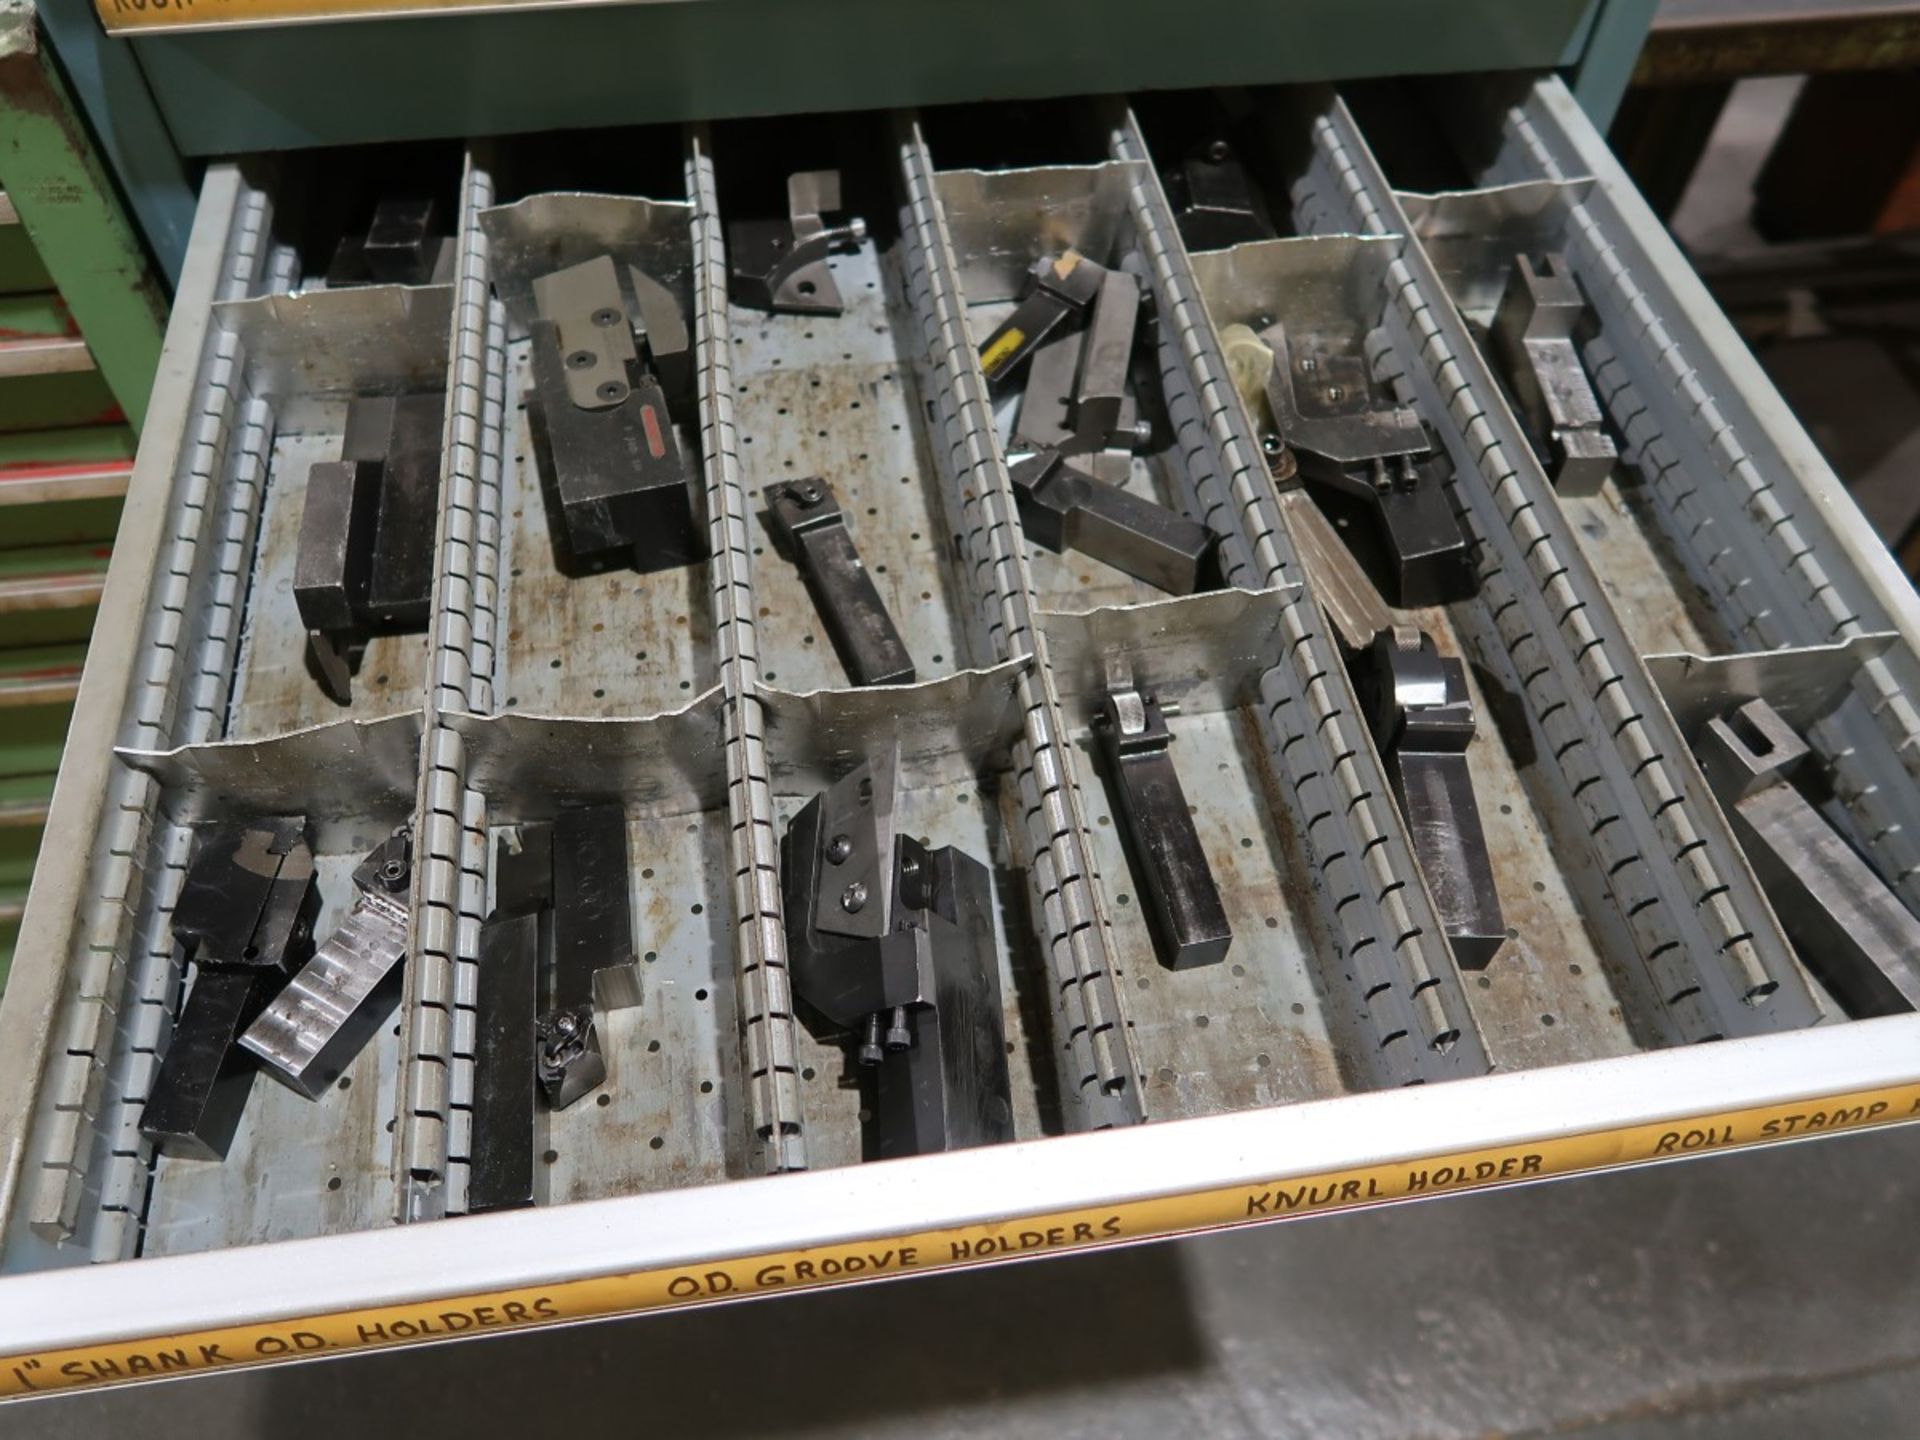 LISTA 12-DRAWER CABINET W/ CONTENTS INCLUDING: DRILLS, TAPS, BORING BARS, CARBIDE INSERTS, ETC. - Image 7 of 11